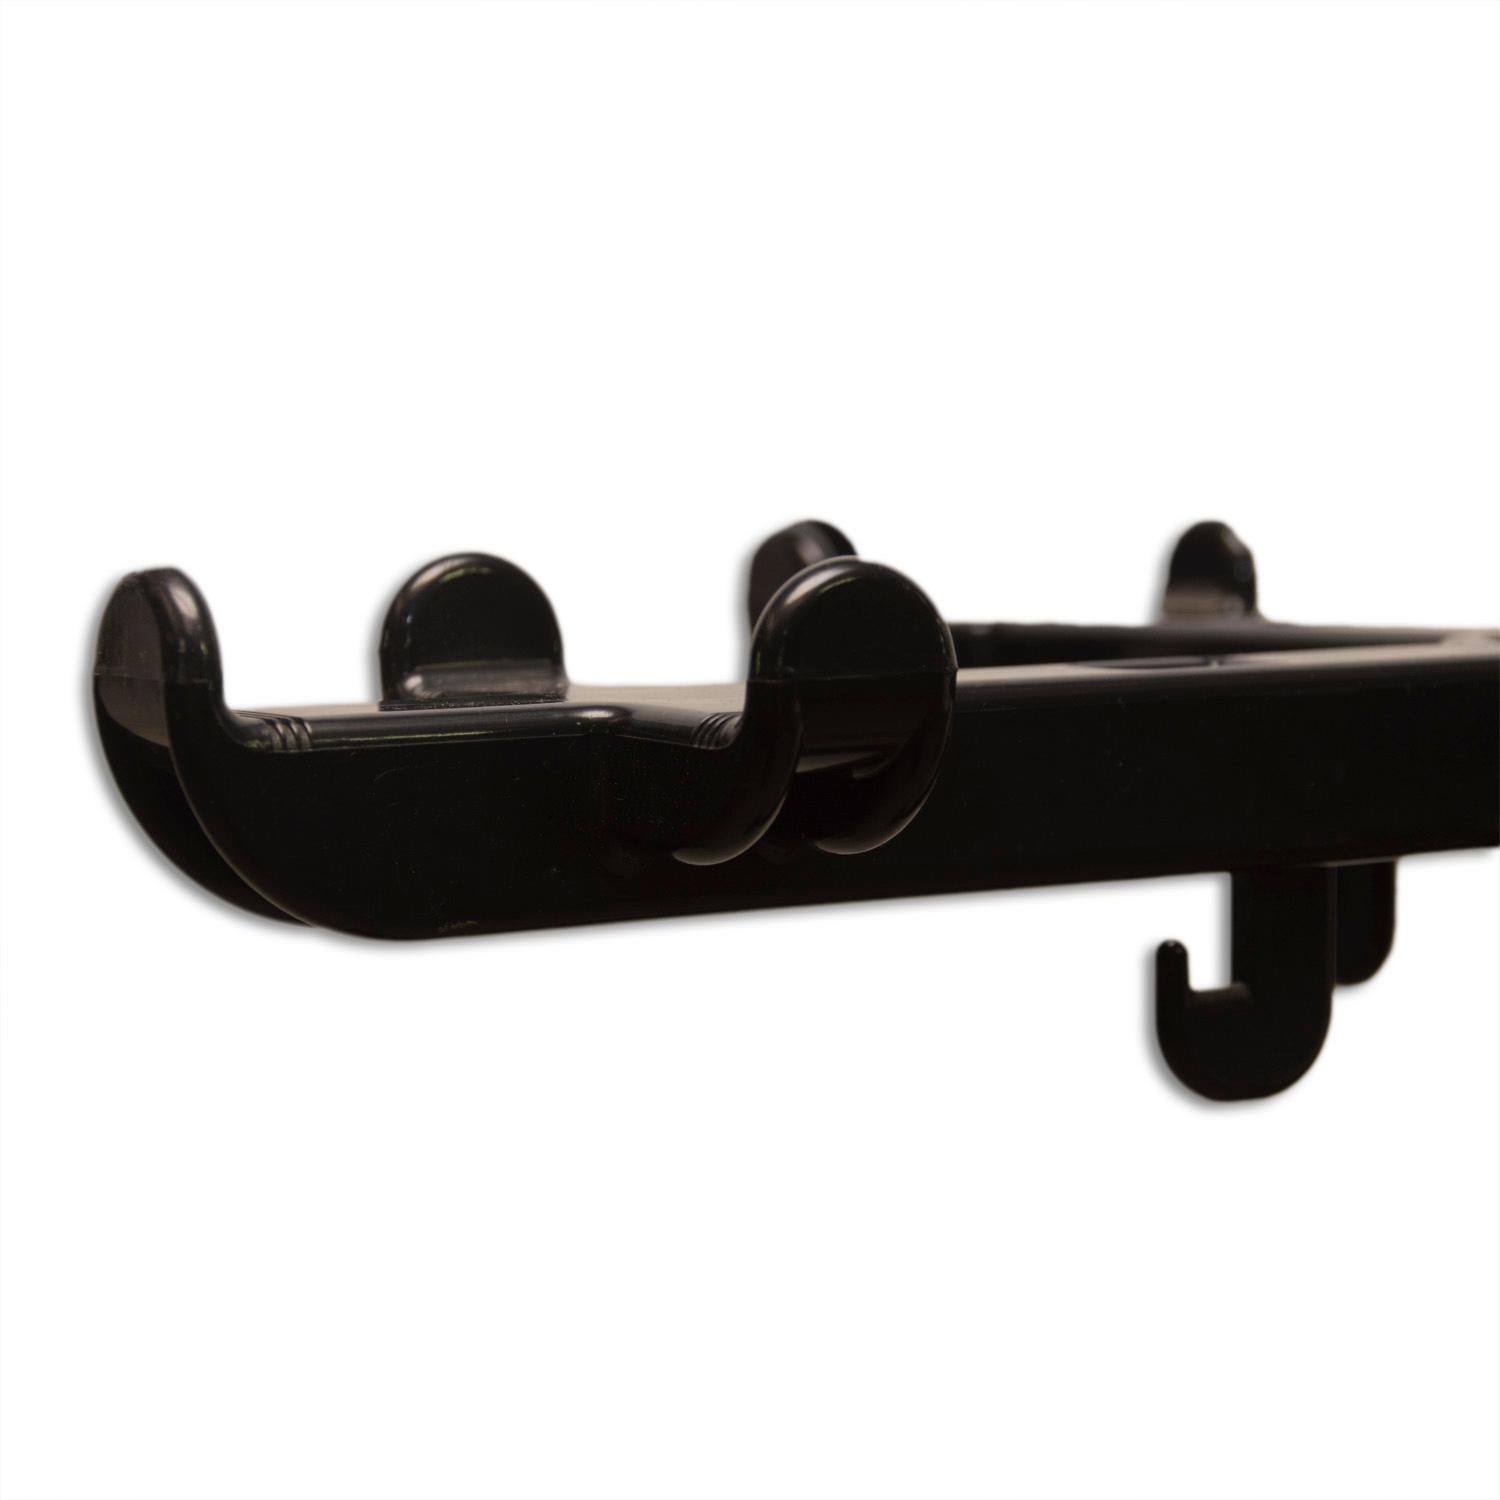 Italian Coat Rack by Ettore Sottsass for Olivetti, 1970s In Good Condition In Prague 8, CZ